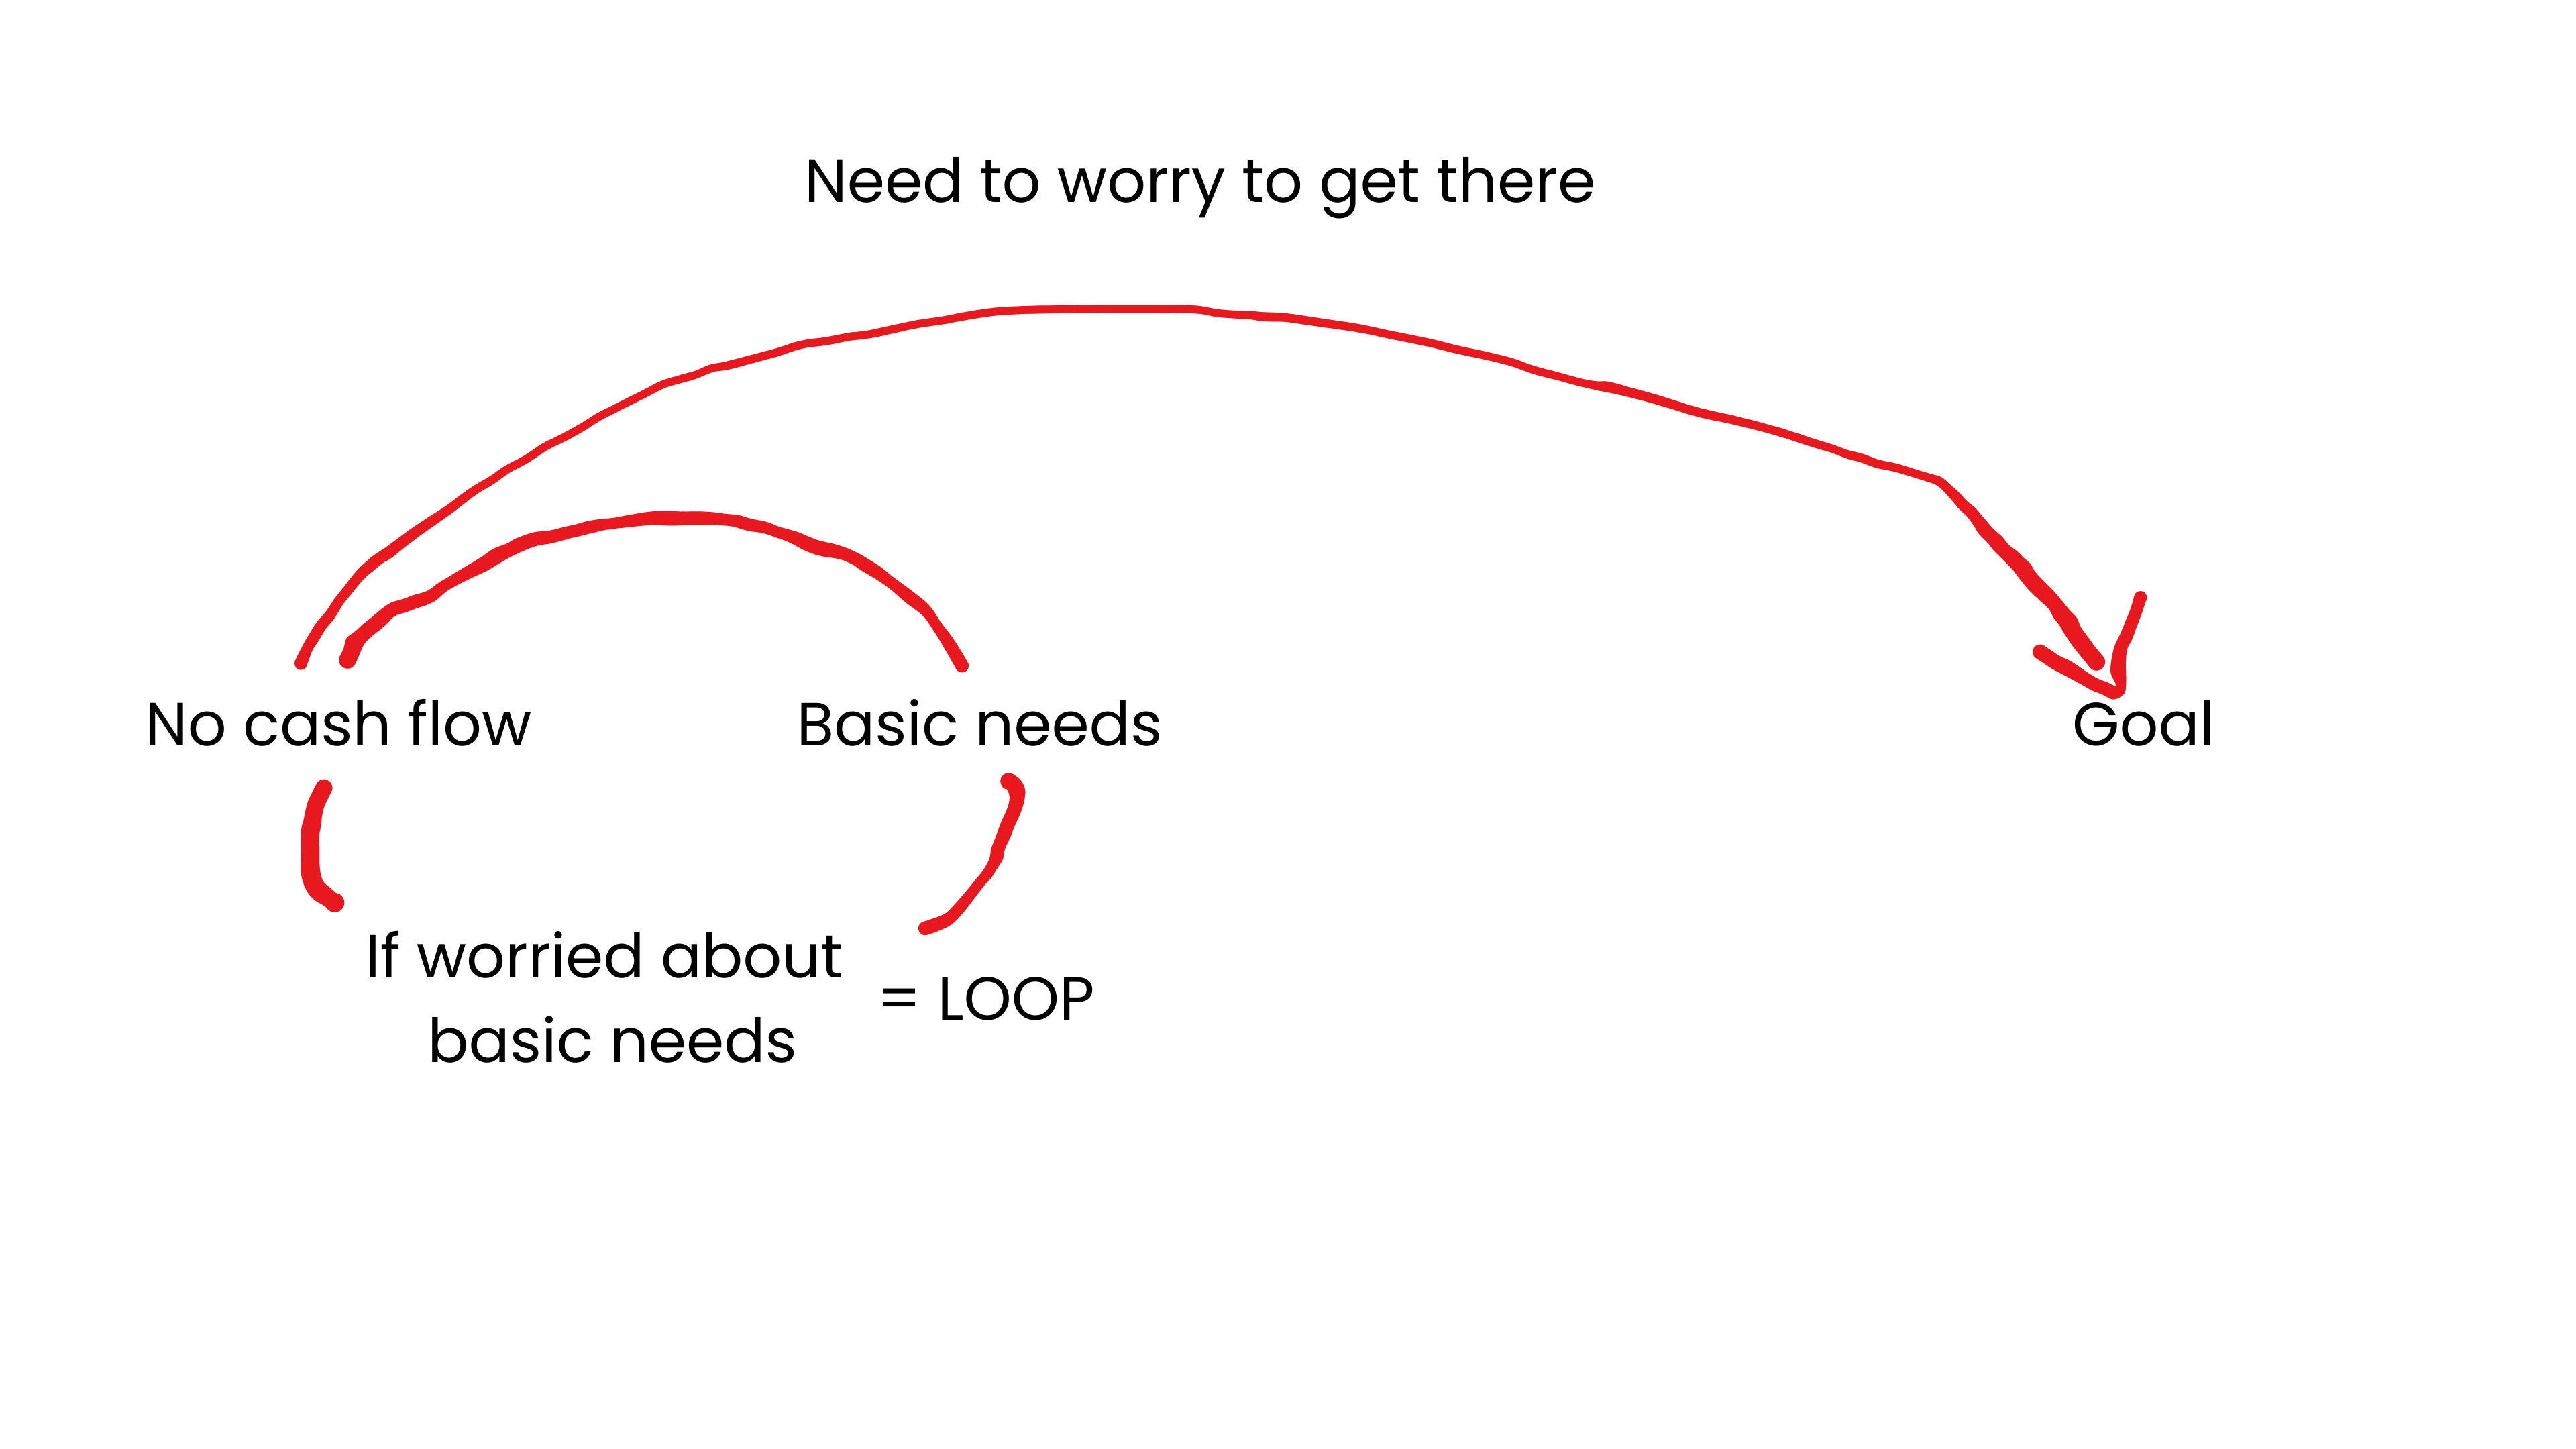 when worrying about basic needs you go in a loop to get the basic needs and back to worrying. This prevents you from actually focusing on your goal. This is a diagram that presents this idea.